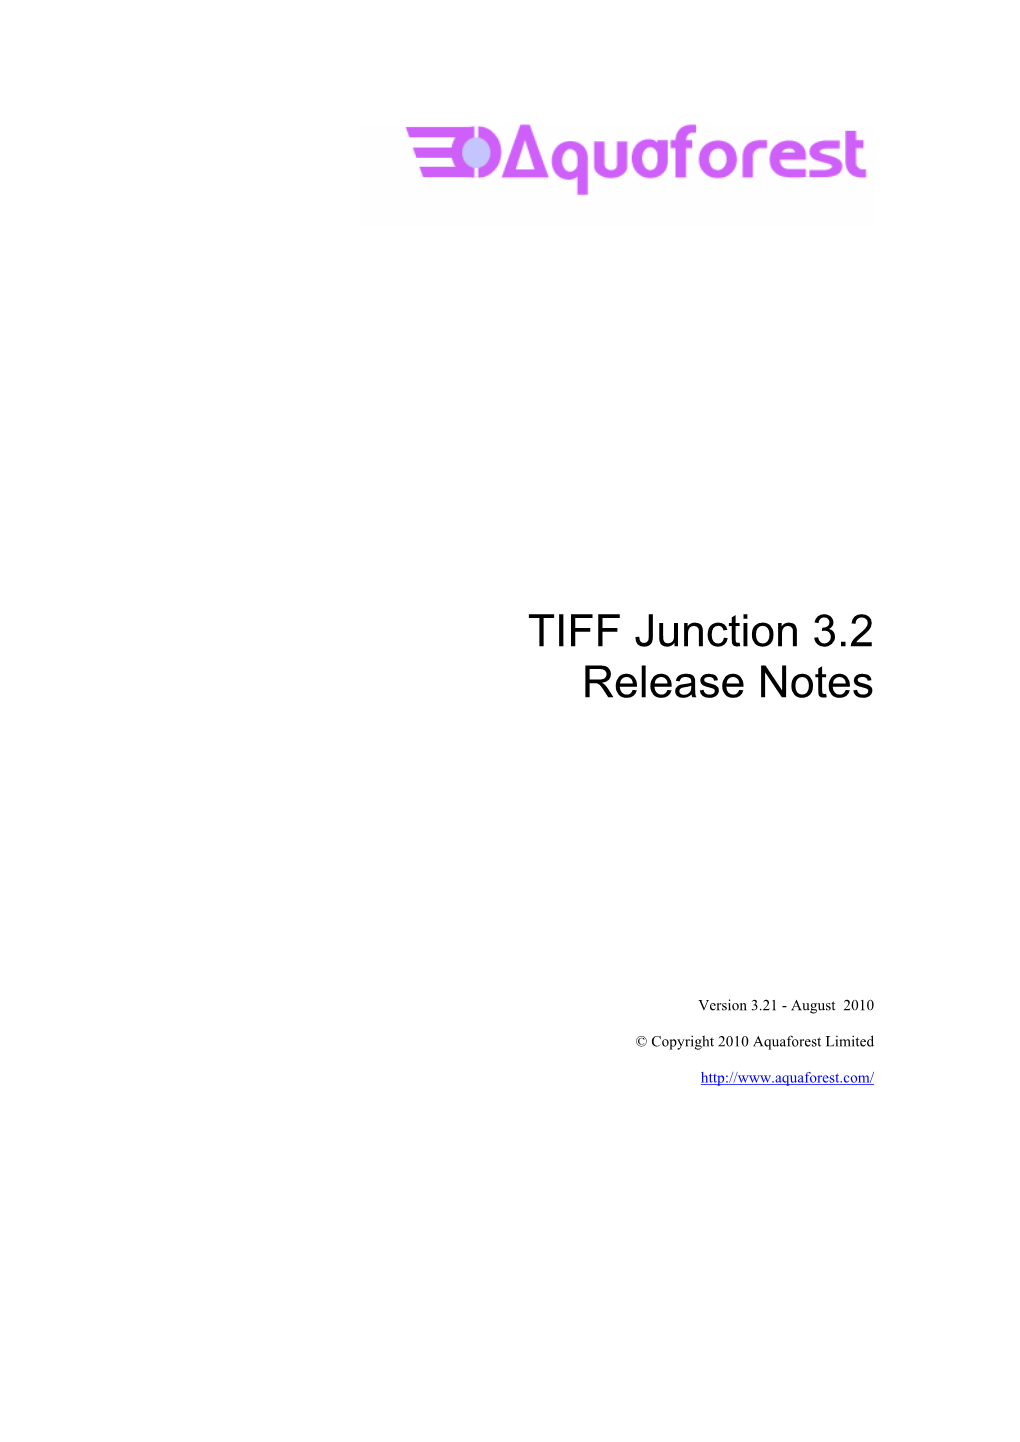 TIFF Junction 3.2 Release Notes